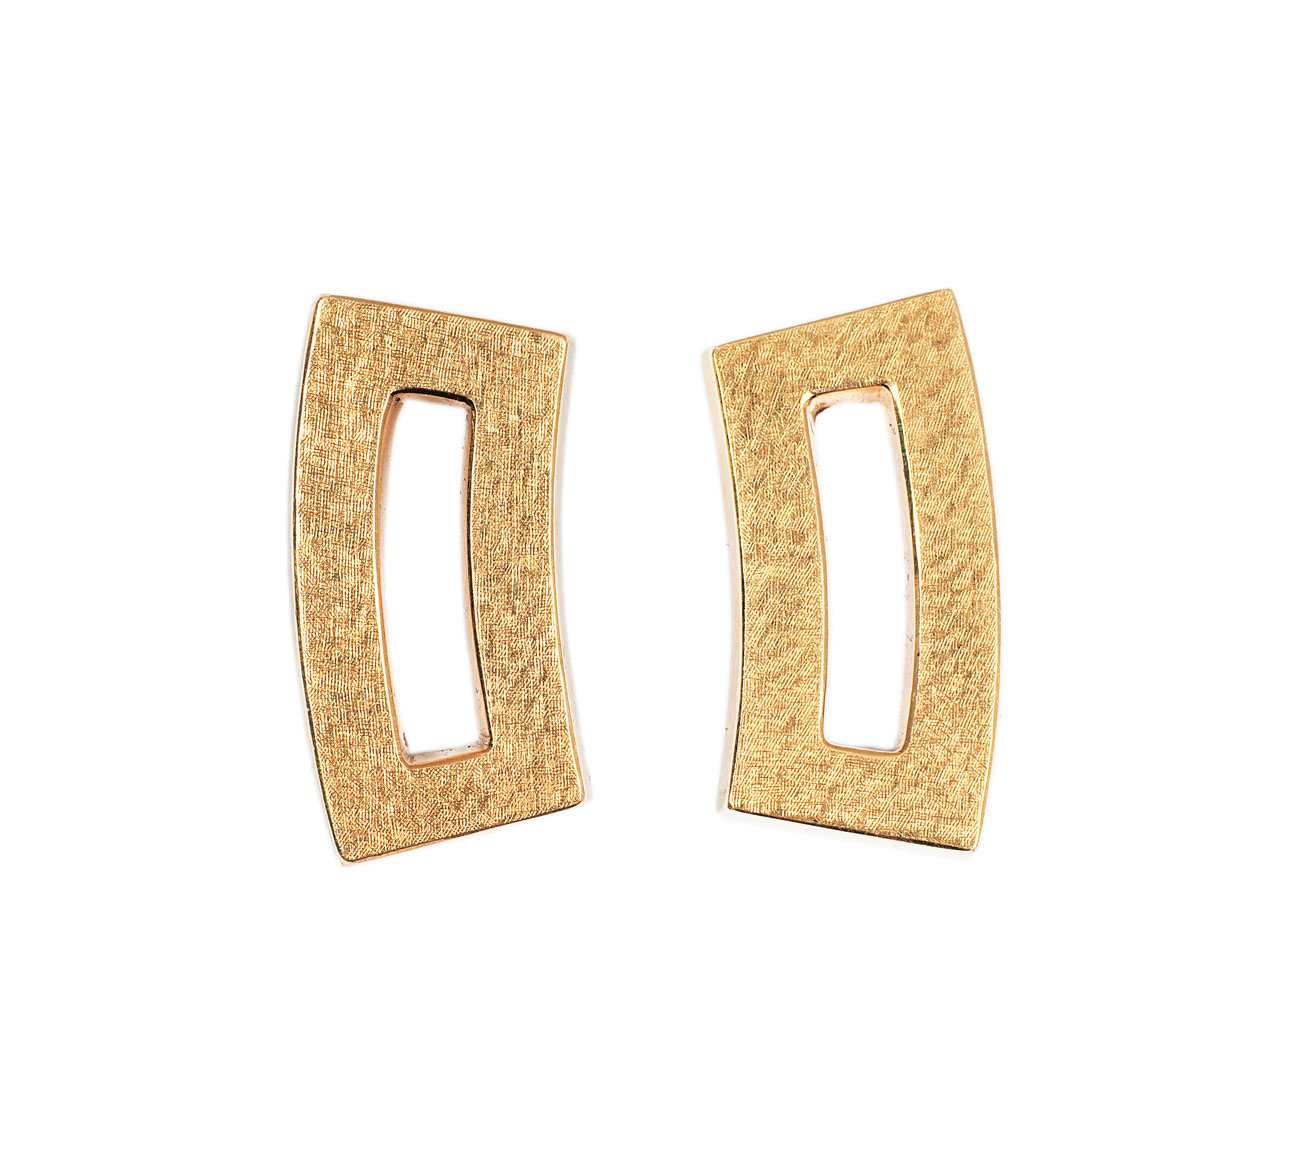 A pair of earclips in gold